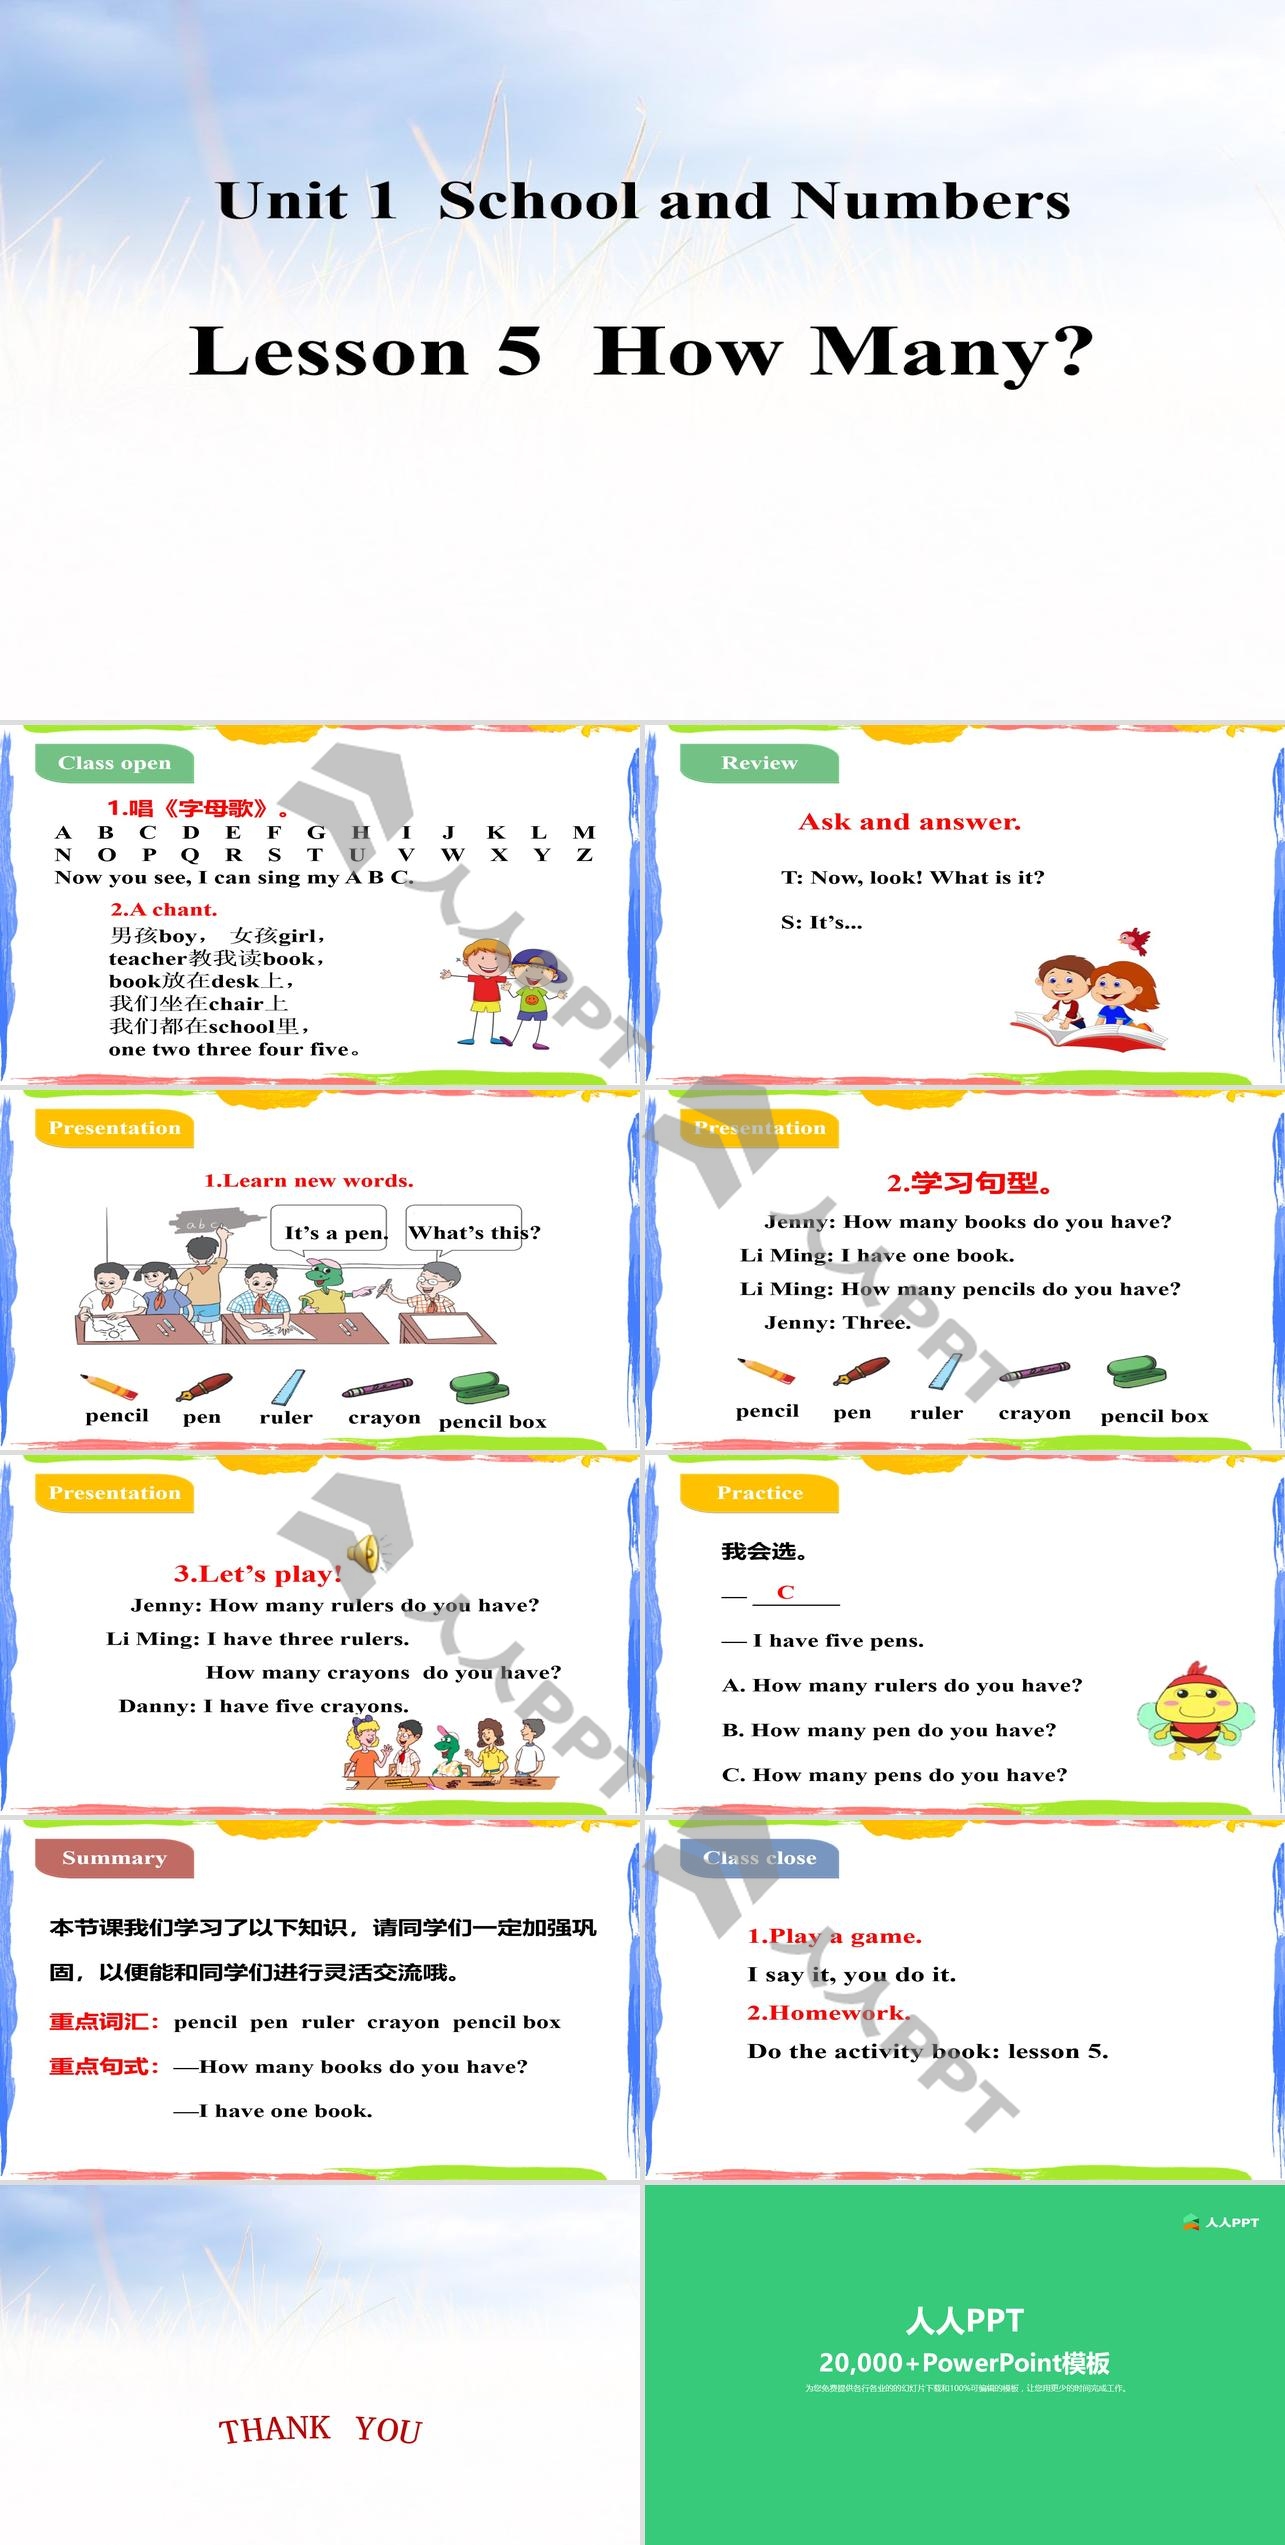 《How Many?》School and Numbers PPT教学课件长图